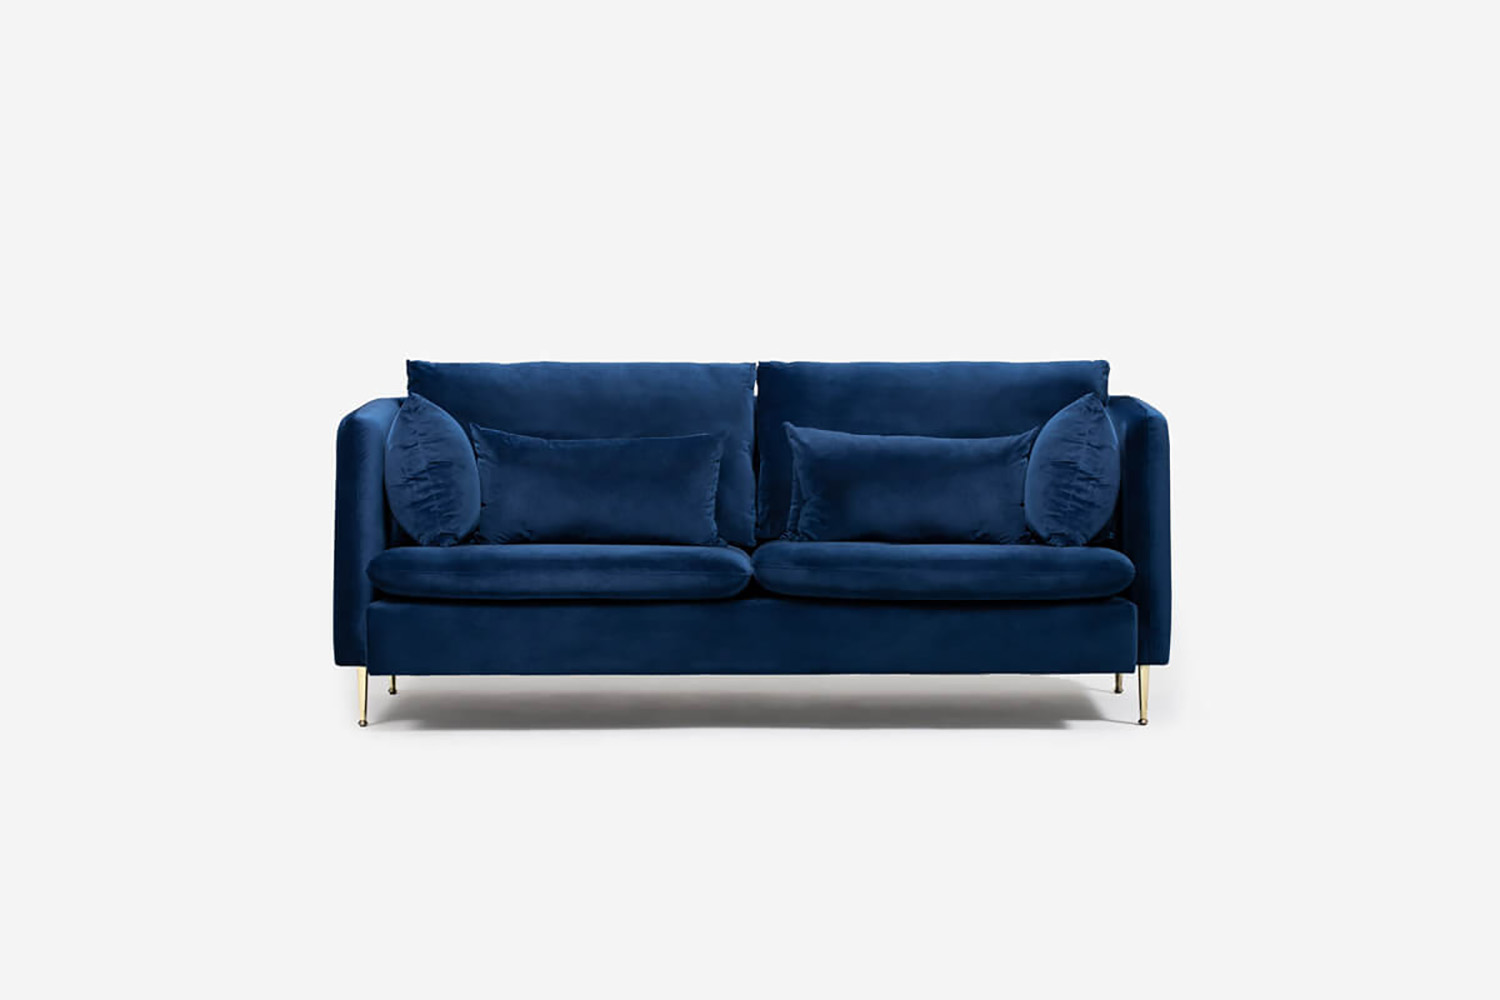 Sherman Couch Royal Blue, Royal Blue Leather Sofa